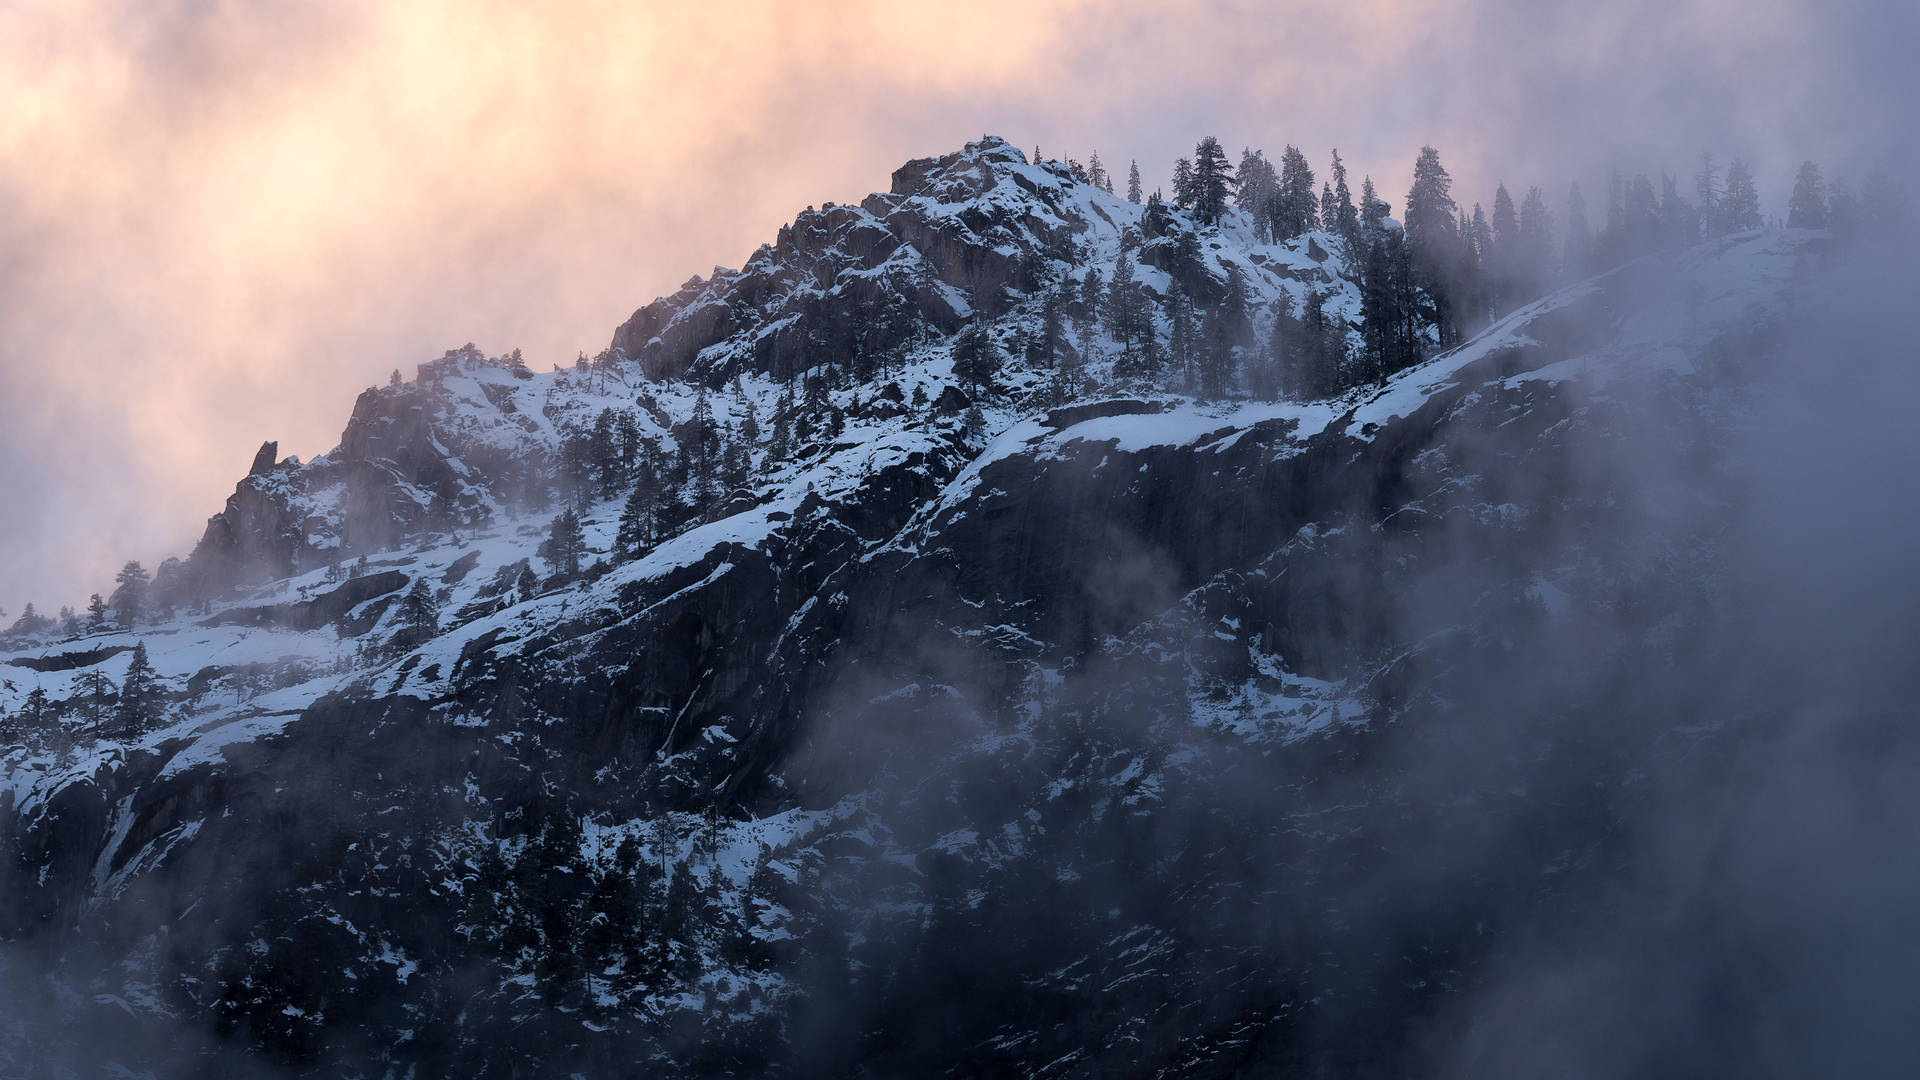 Cold and Foggy Winter Mountain Landscape Wallpaper